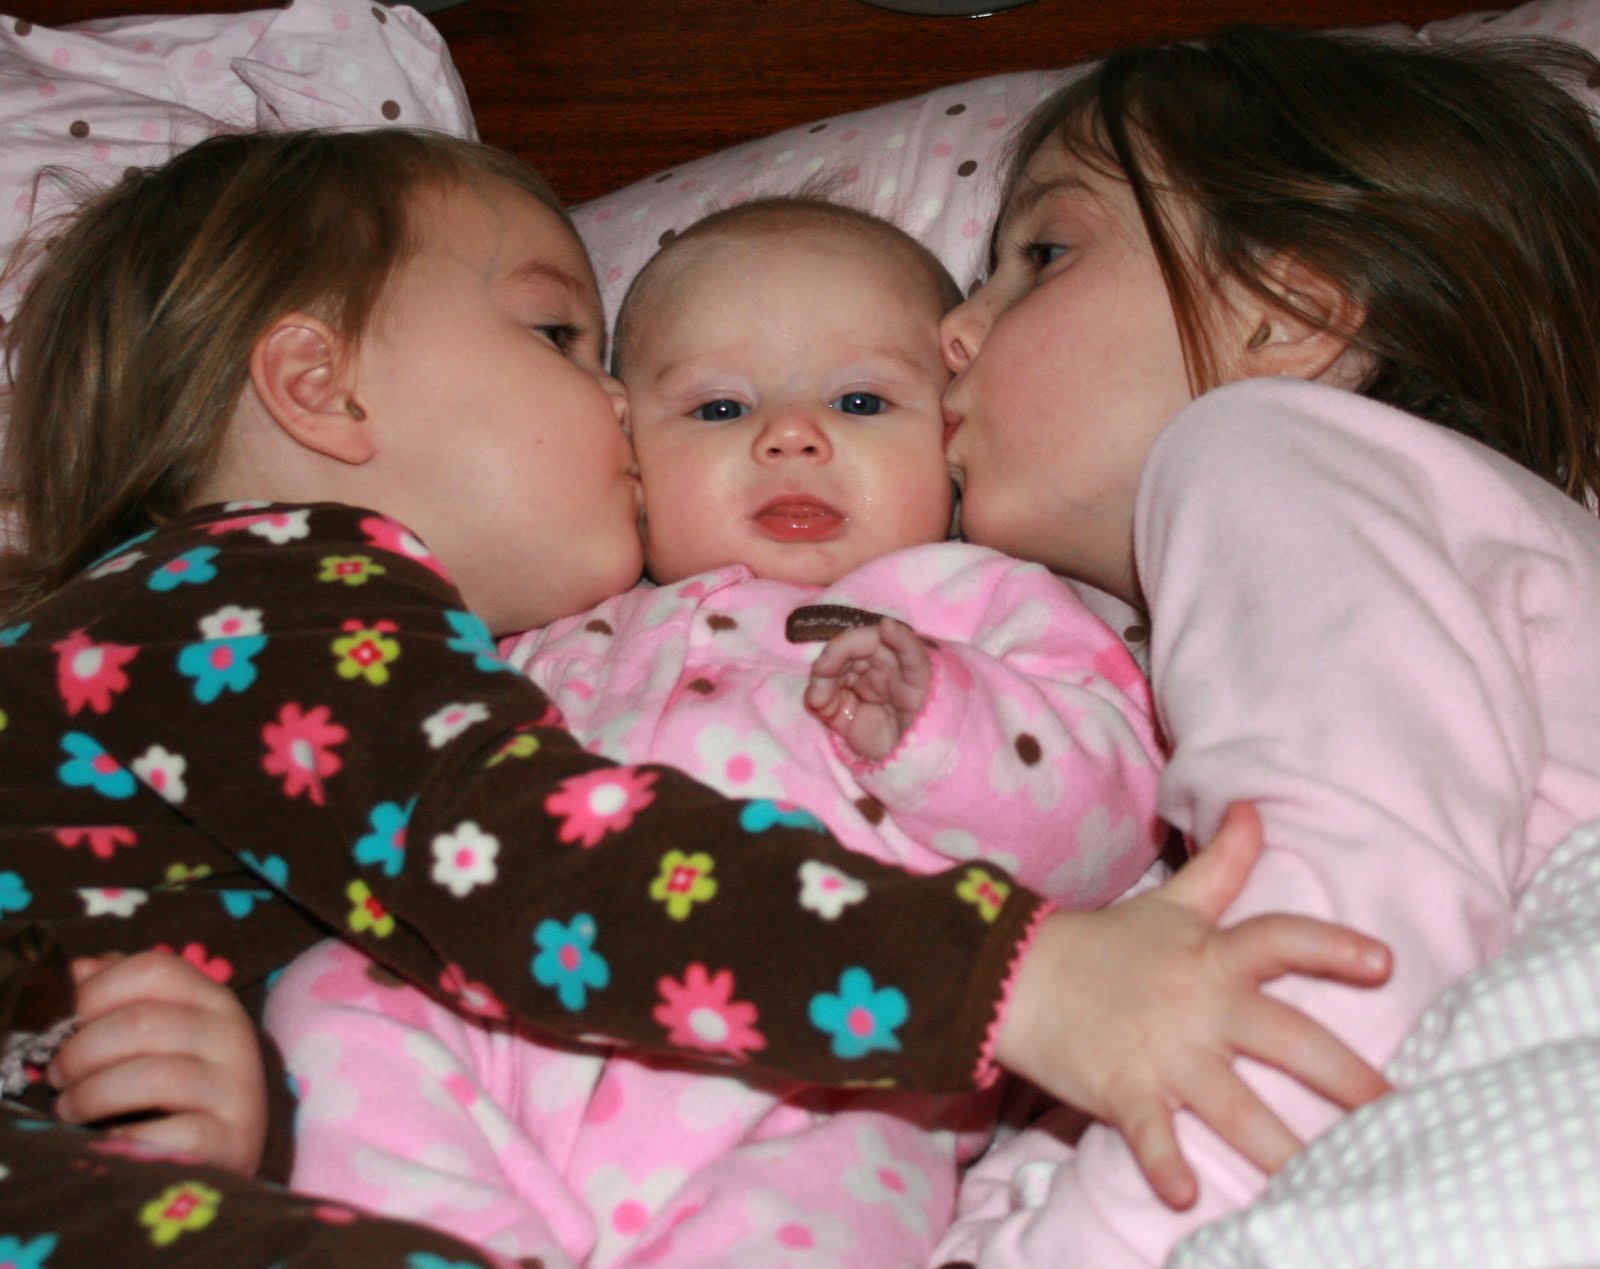 [three+girls+in+bed+for+storytime+006-1.jpg]